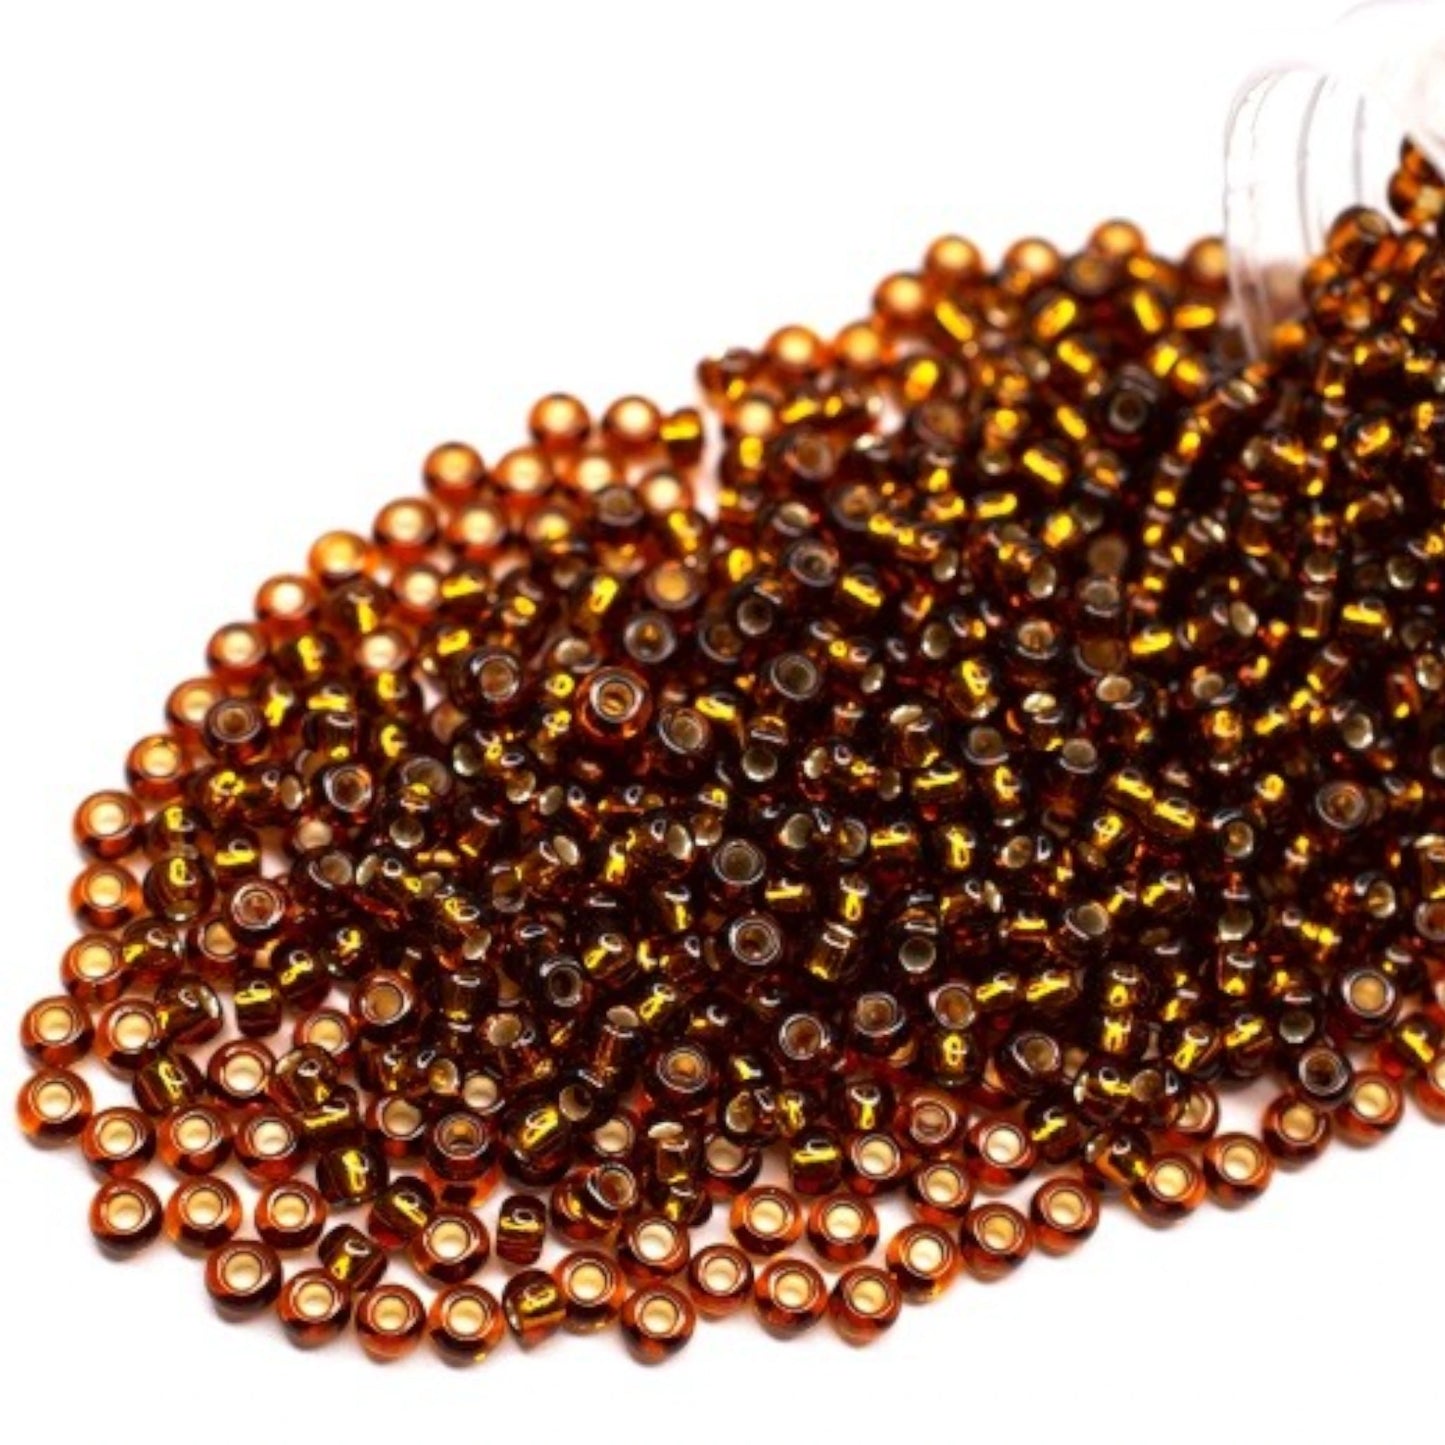 10/0 17110 Preciosa Seed Beads. Brown transparent Silver lined.